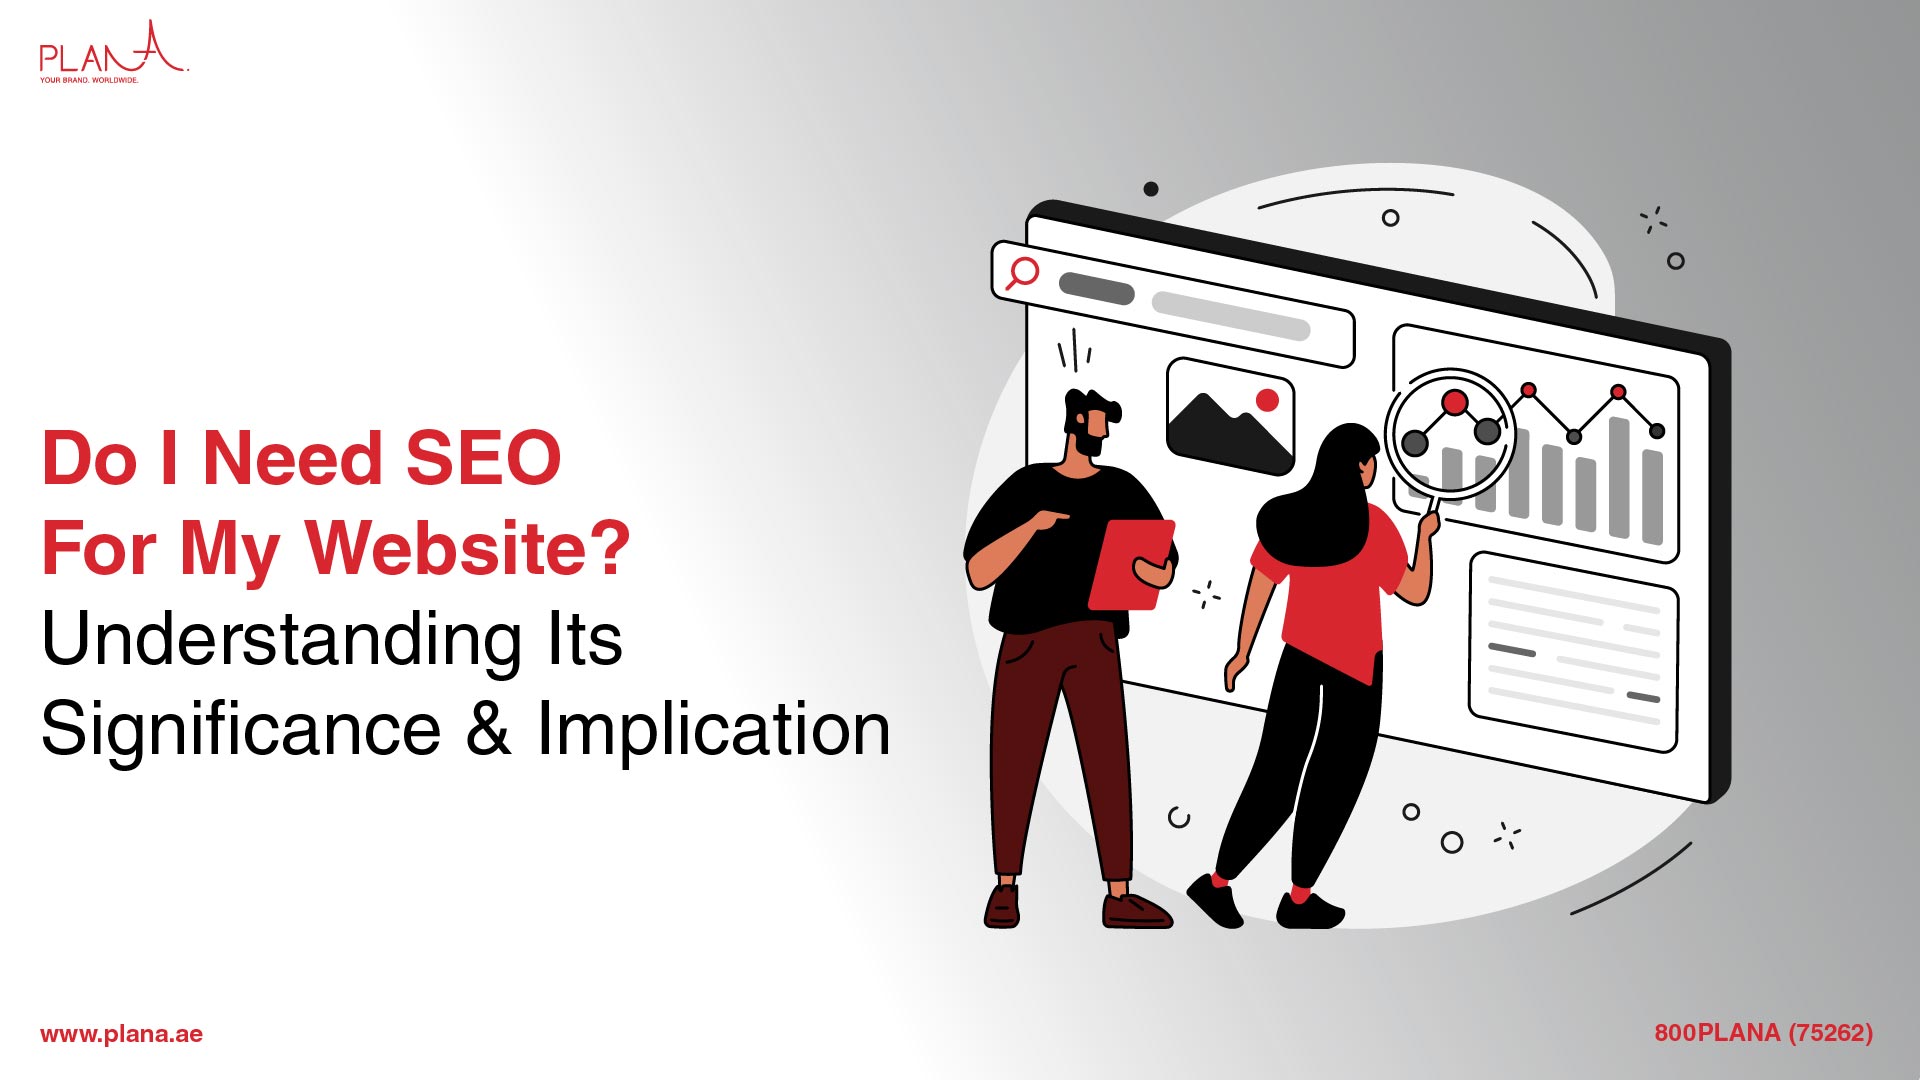 Do I Need SEO For My Website? Understanding Its Significance & Implication